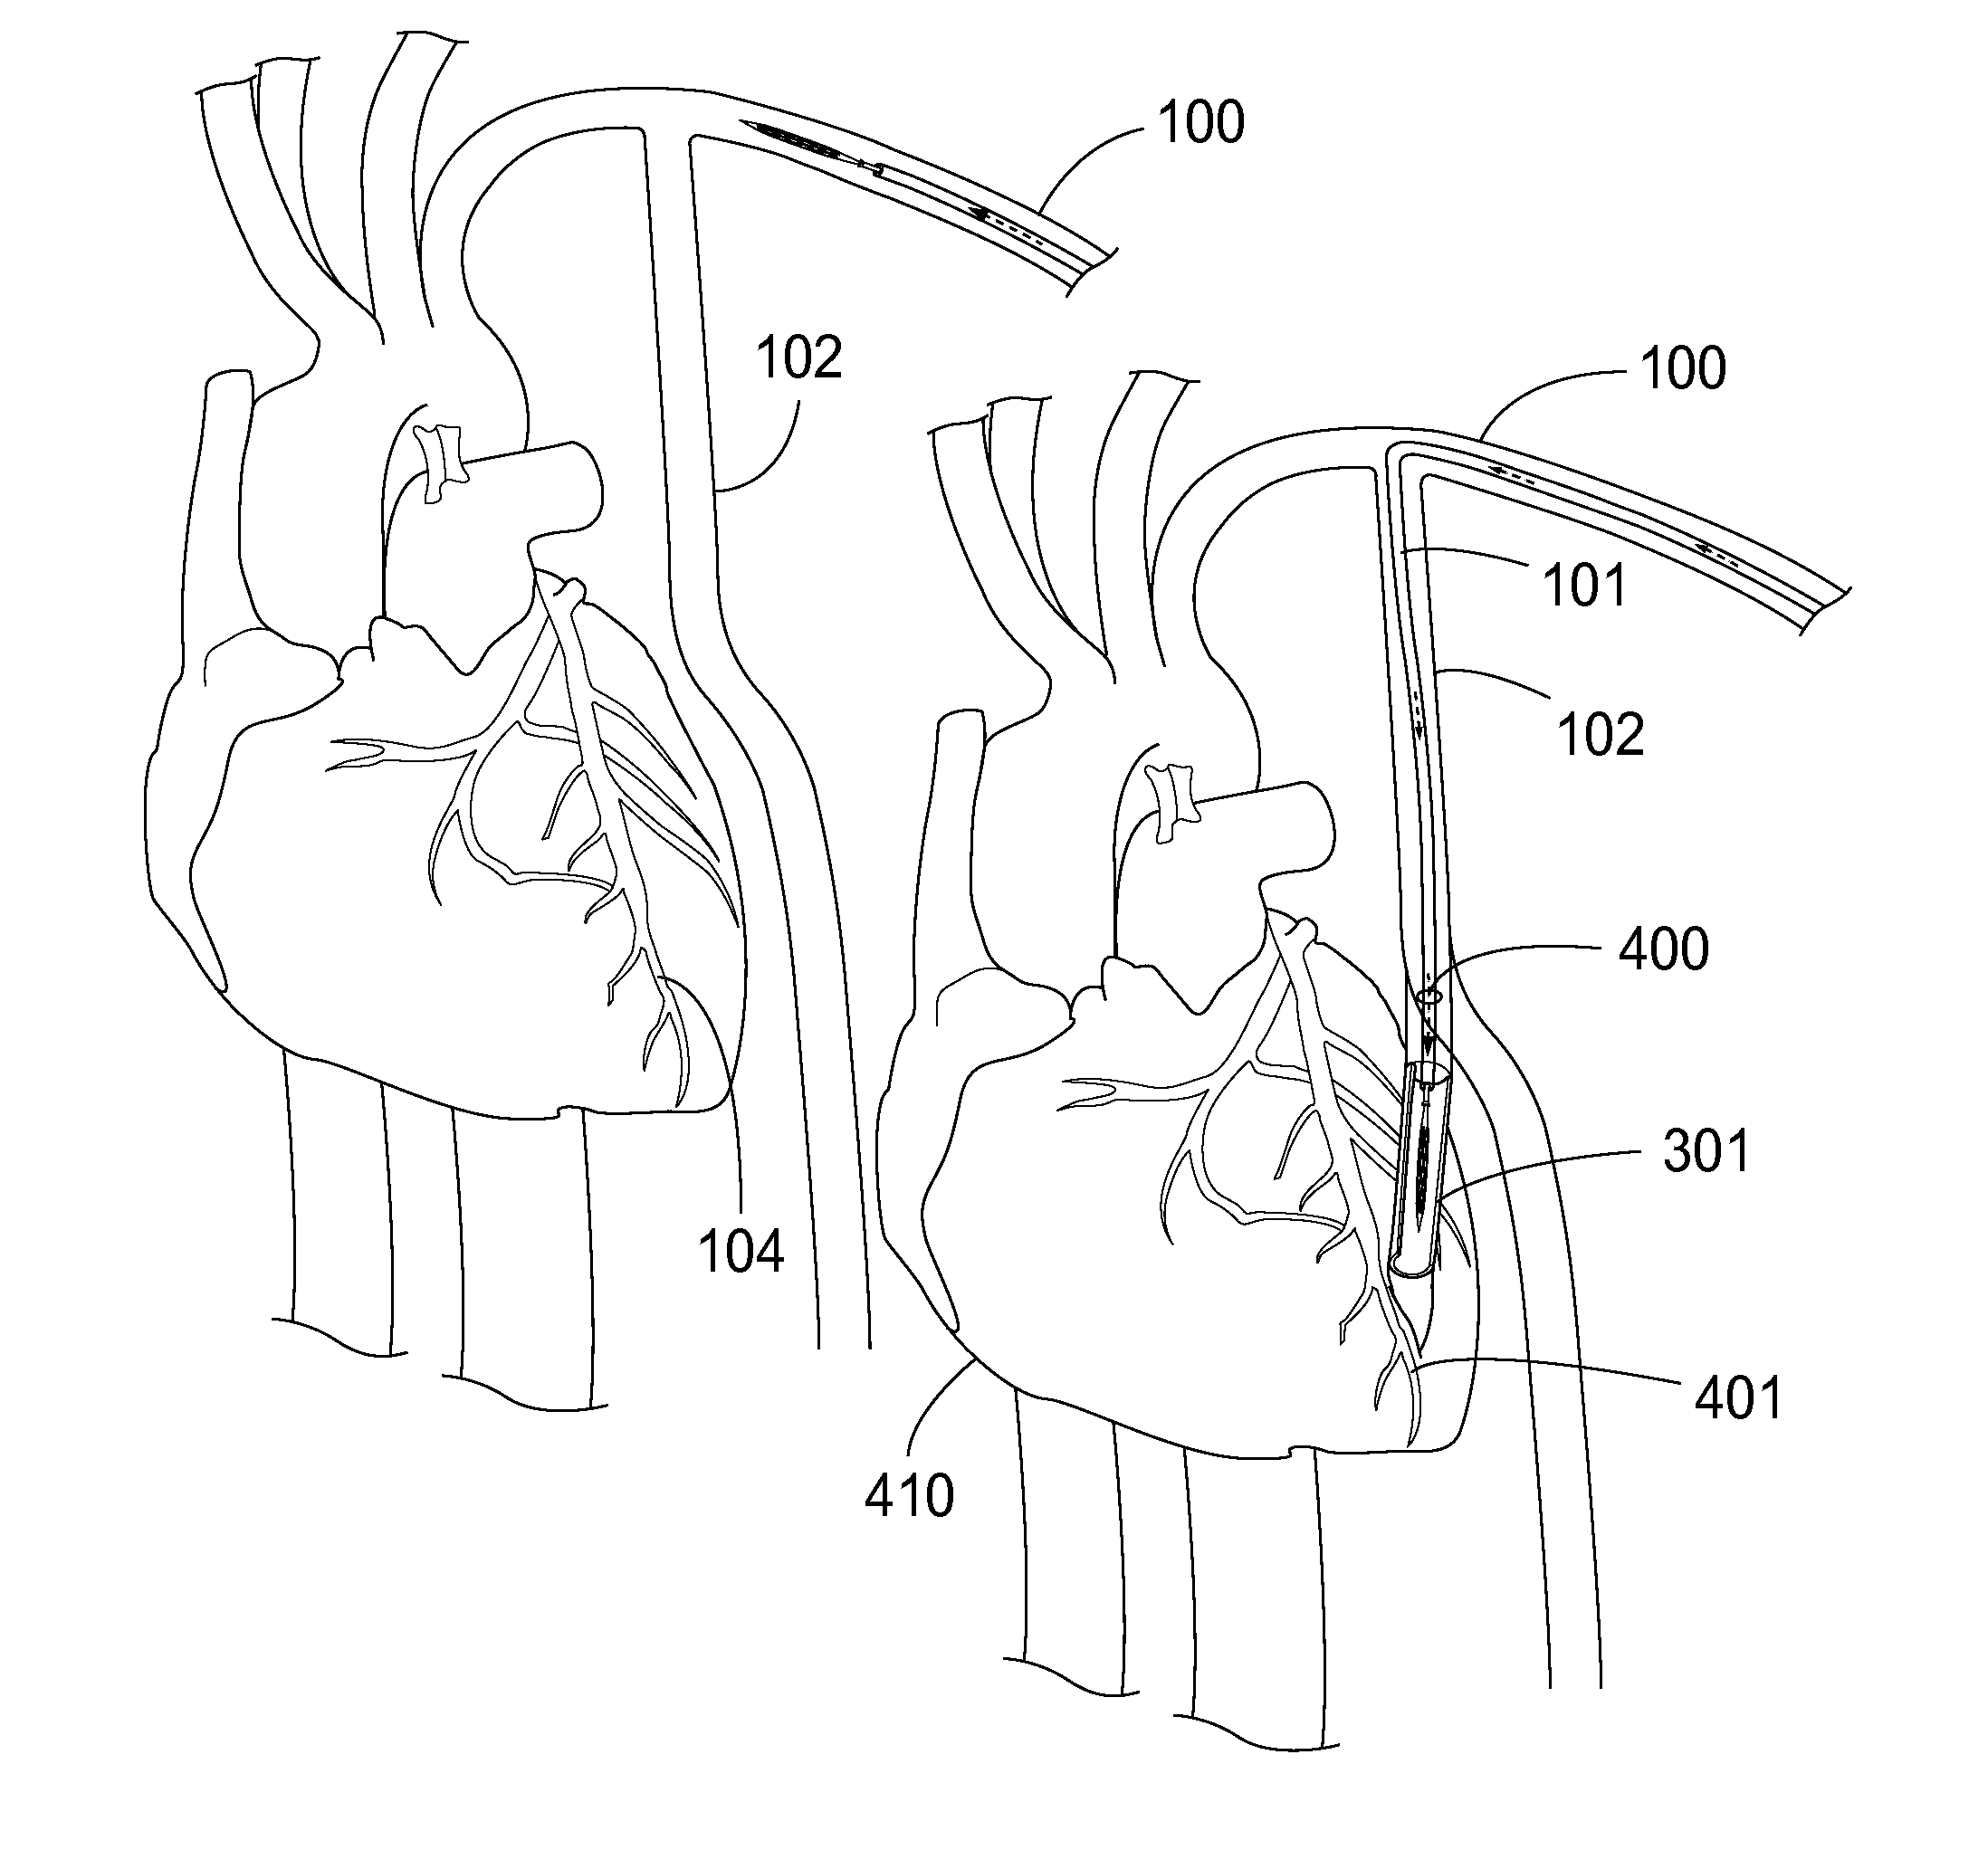 Device, system, kit, and method for epicardial access